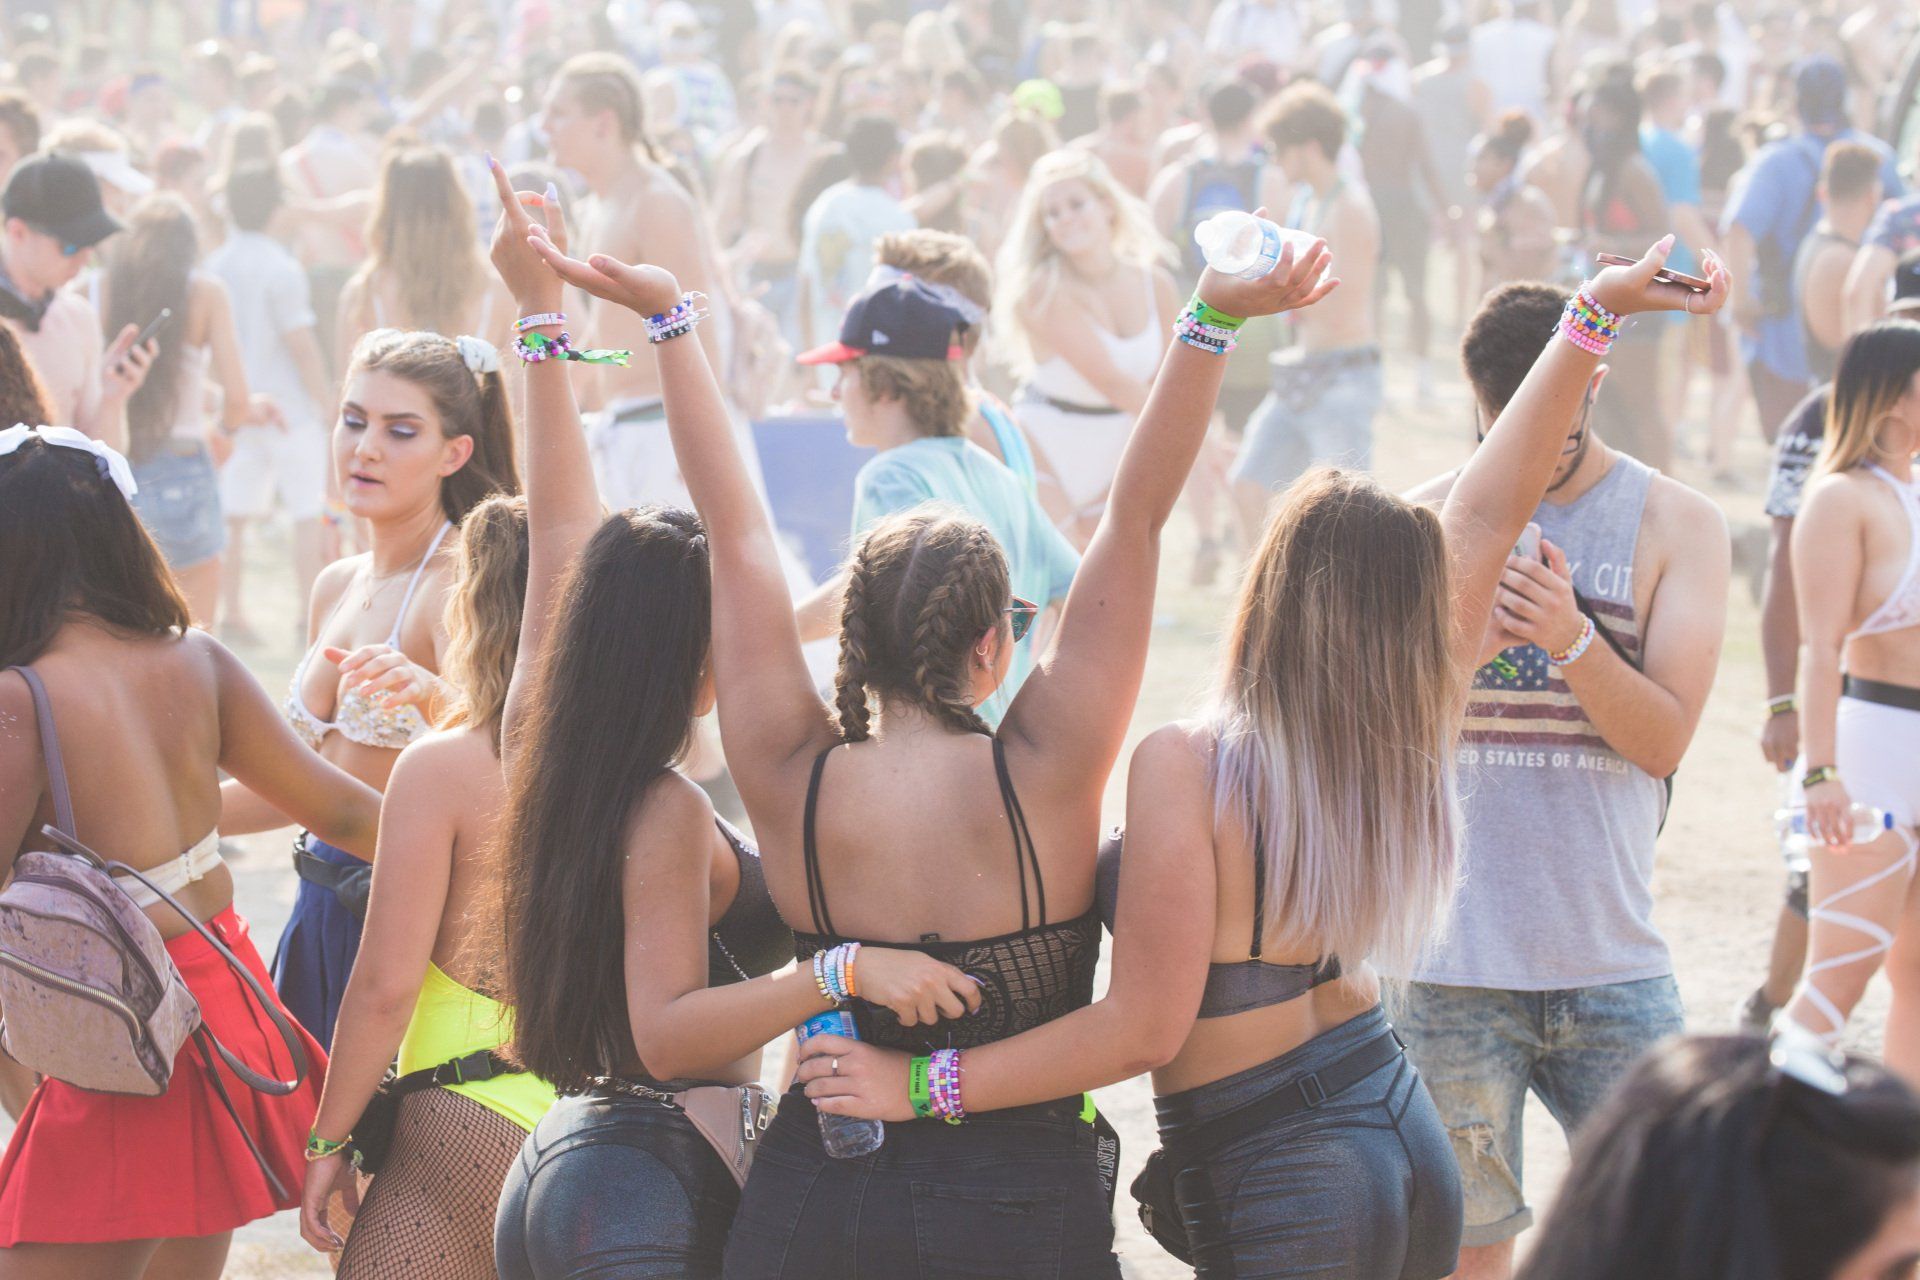 A group of people are dancing at a music festival with their arms in the air.